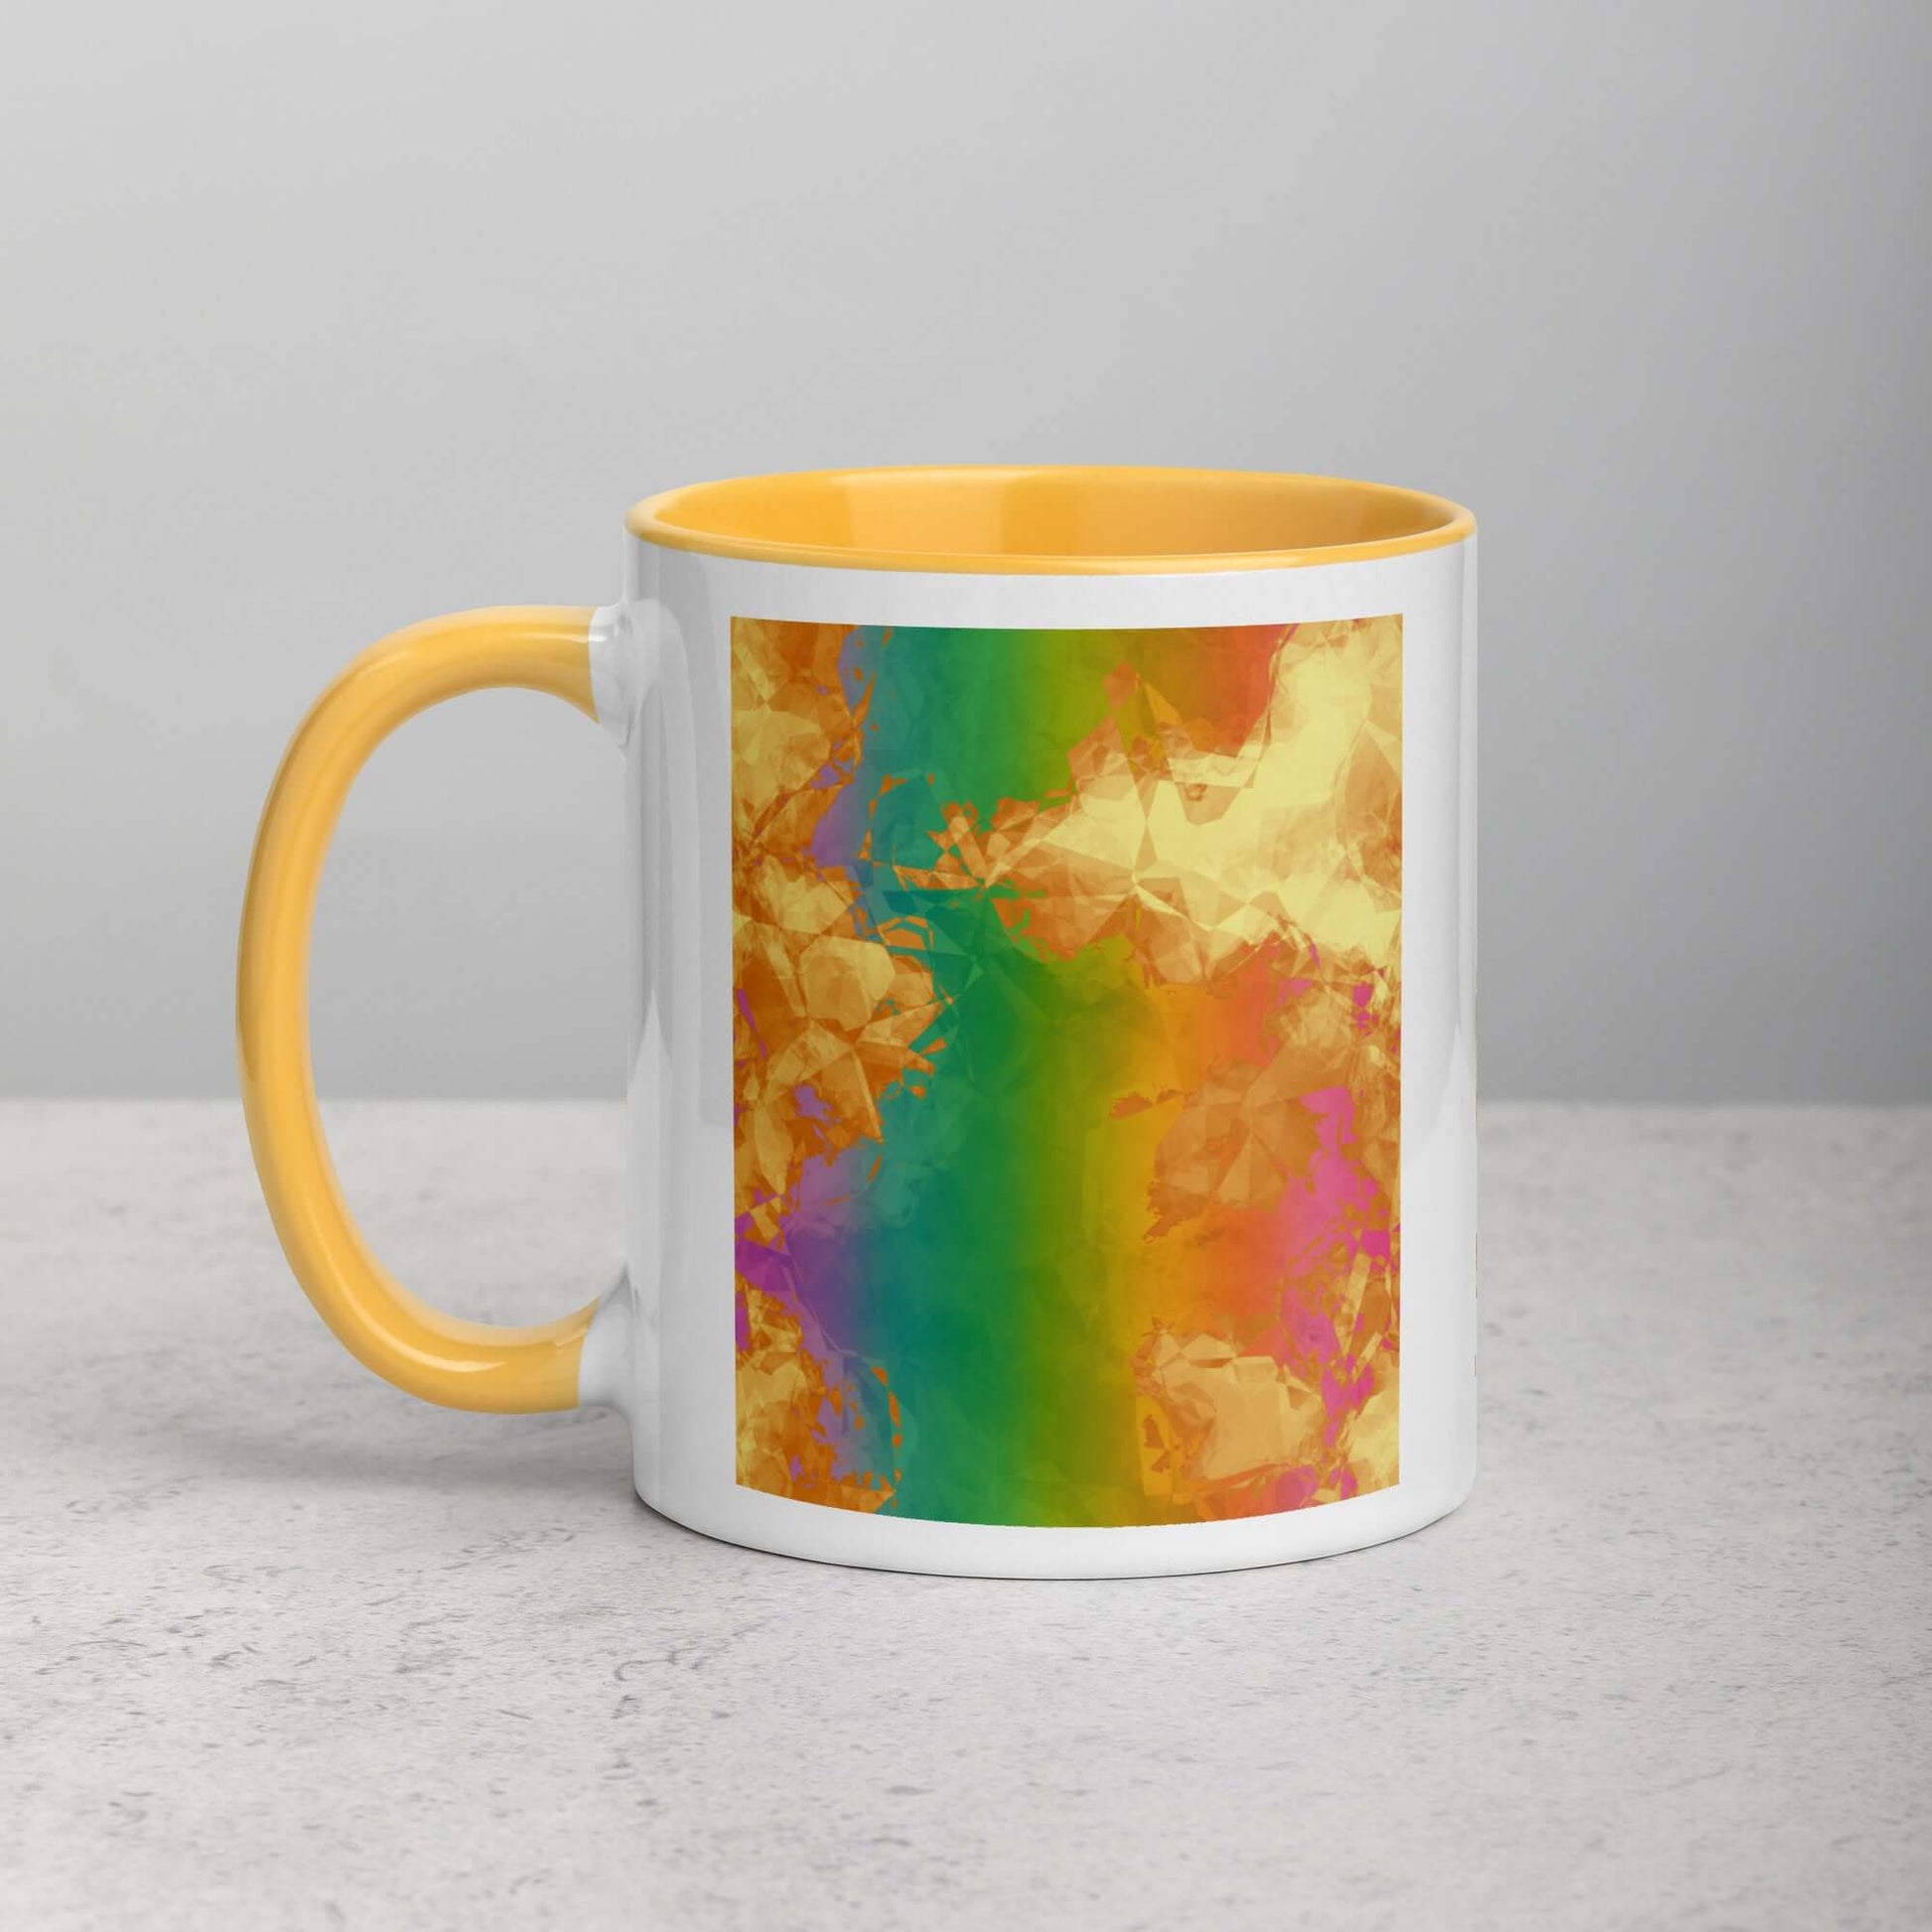 Fiery Rainbow “Rainbow Geode” Abstract Art Mug with Golden Yellow Color Inside Left Handed Front View